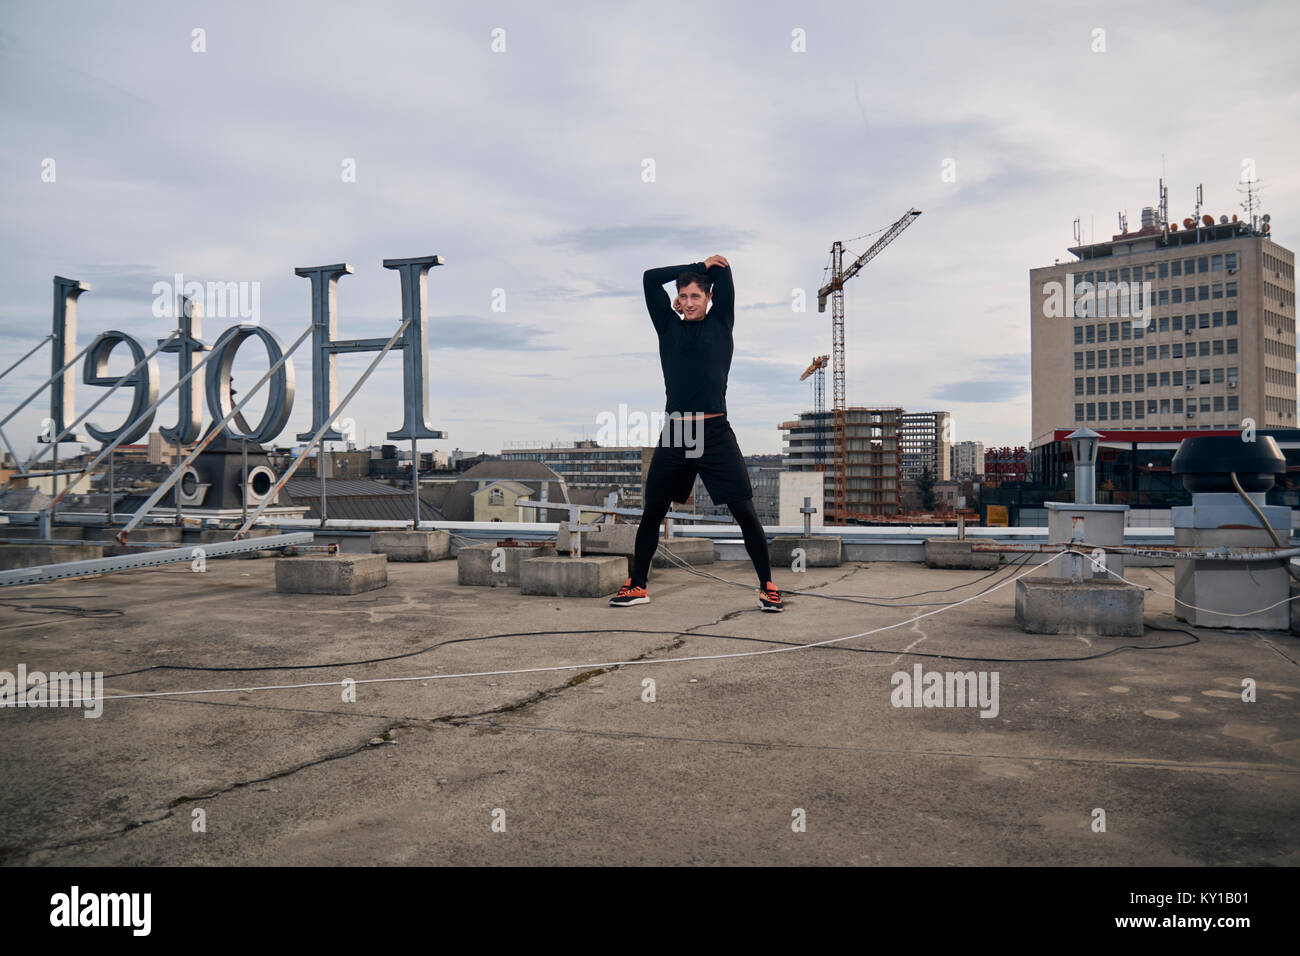 one young man stretching outdoors on rooftop. Buildings crane behind, cityscape, urban area. 'Hotel' sign spelled backwards. Stock Photo